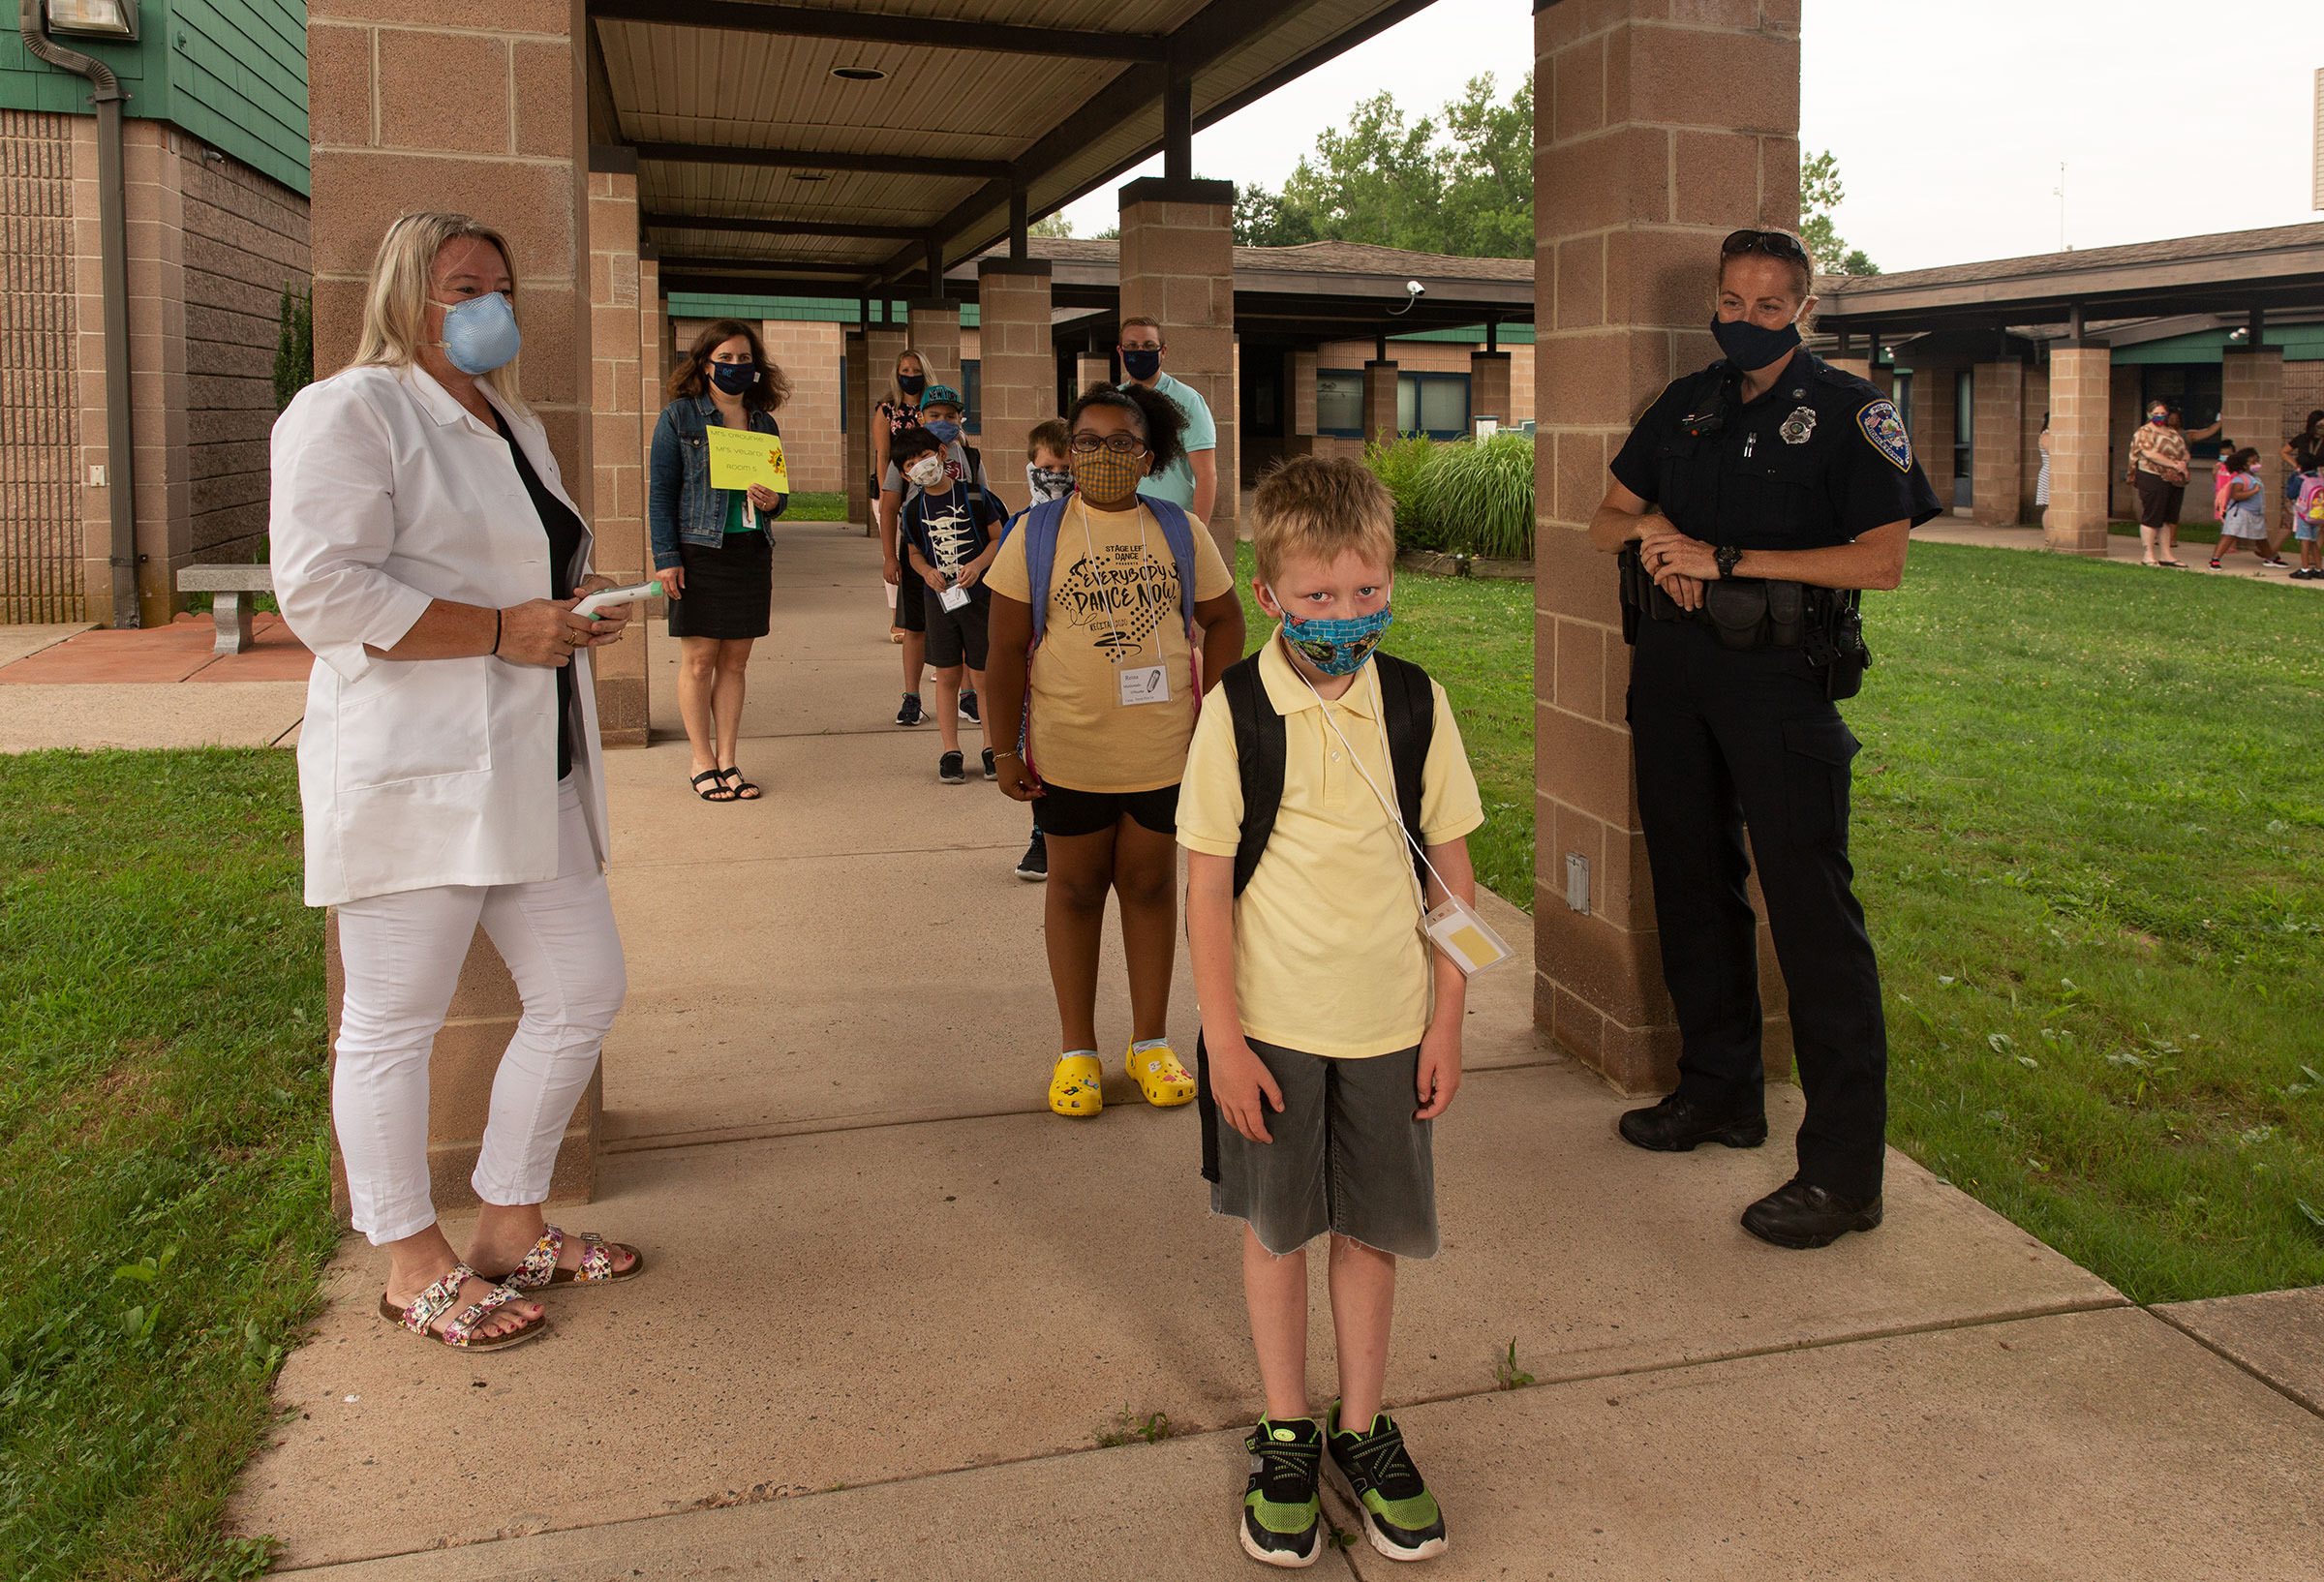 Nurse Sarah Ladd and school resource officer Kristen Tyrseck ensure kids <a href="https://time.com/5870132/schools-coronavirus/" target="_blank" rel="noopener noreferrer">keep a safe distance</a> apart as they enter Wesley Elementary School in Middletown, Conn., in July. (Gillian Laub for TIME)